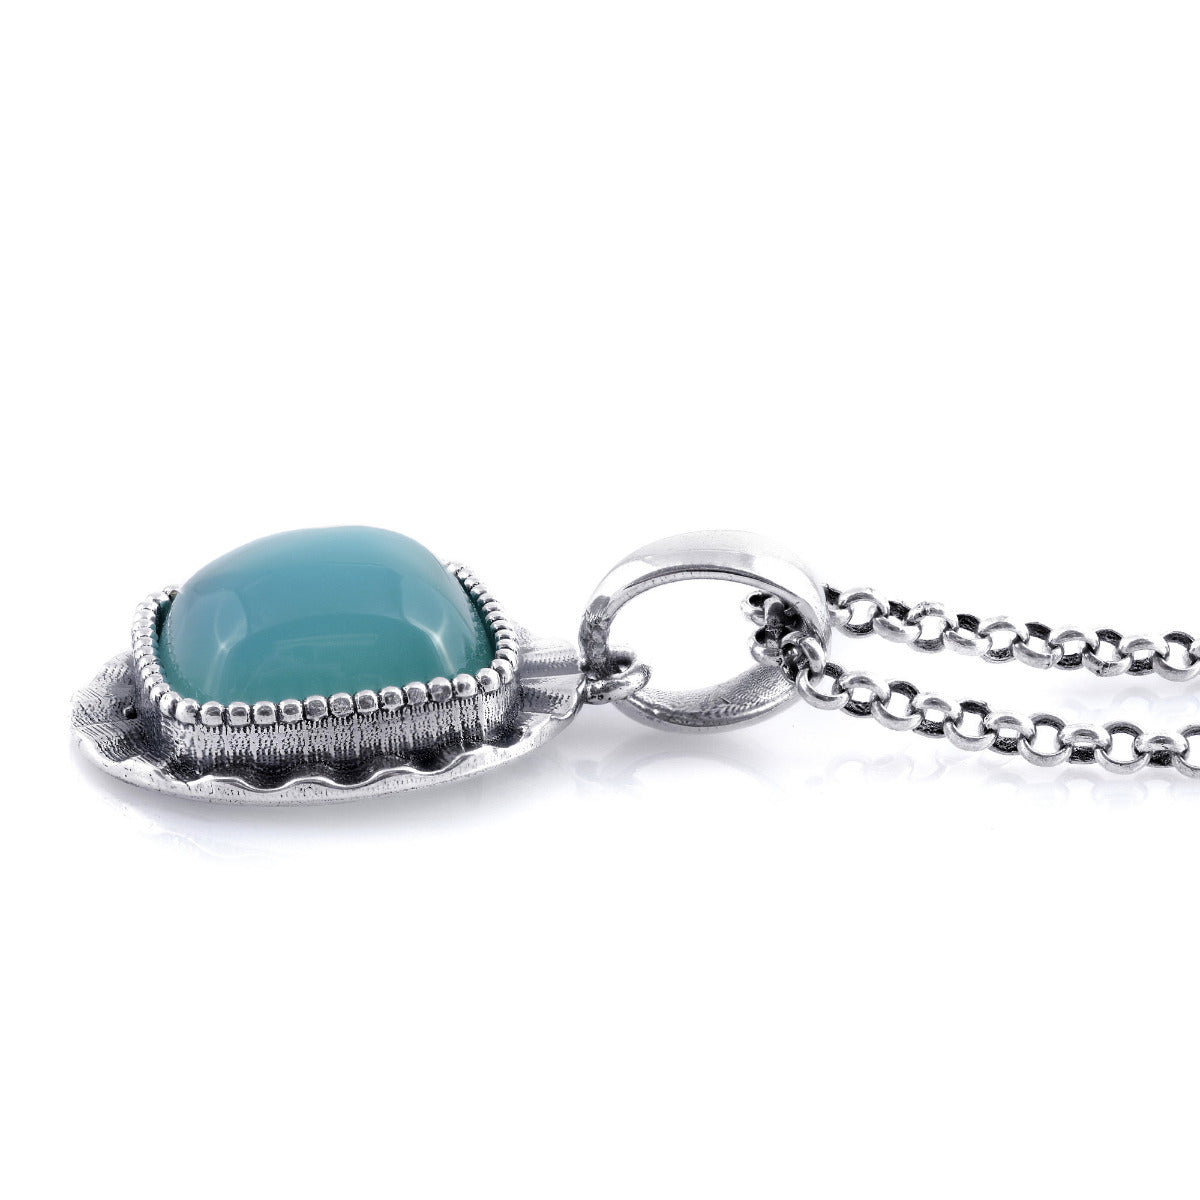 Sterling Silver Paraiba Color 6.84ct TGW Cushion-shape Agate One of a Kind Pendant Necklace